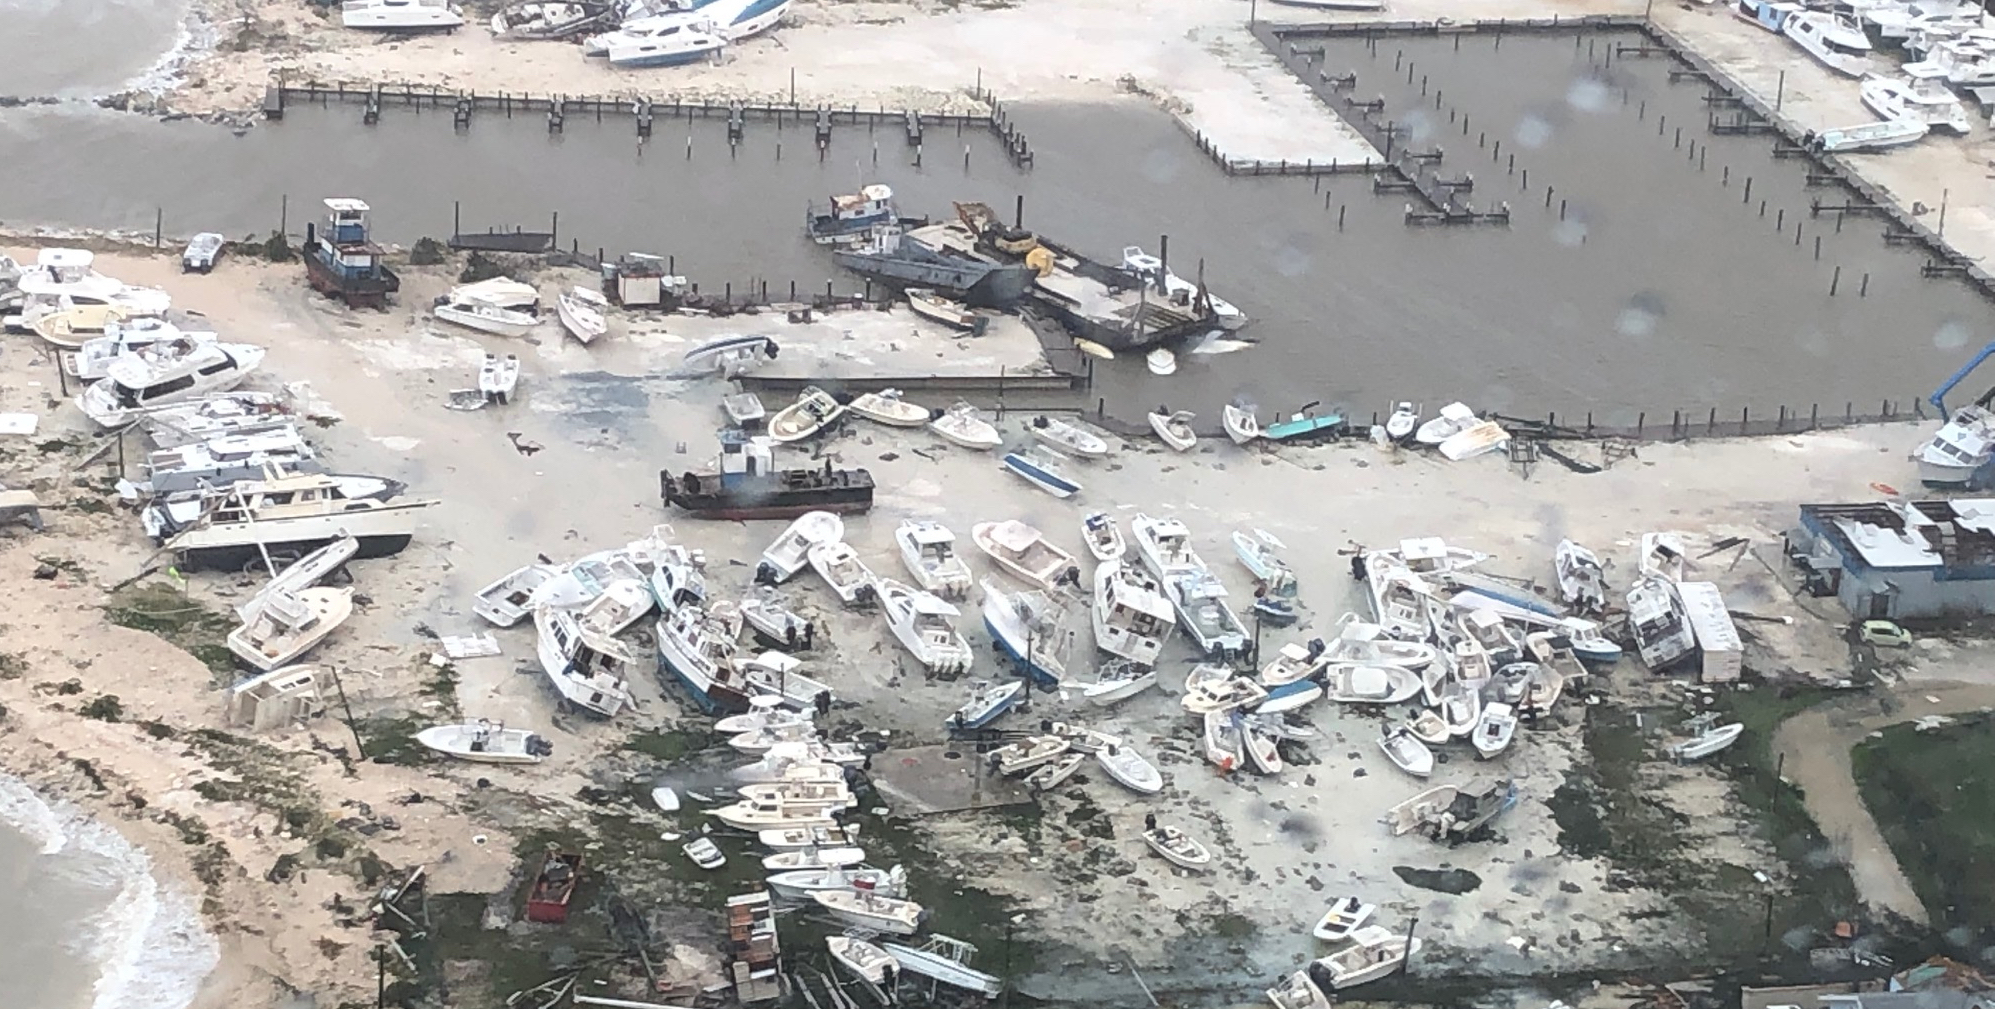 Boats left on a beach after a storm